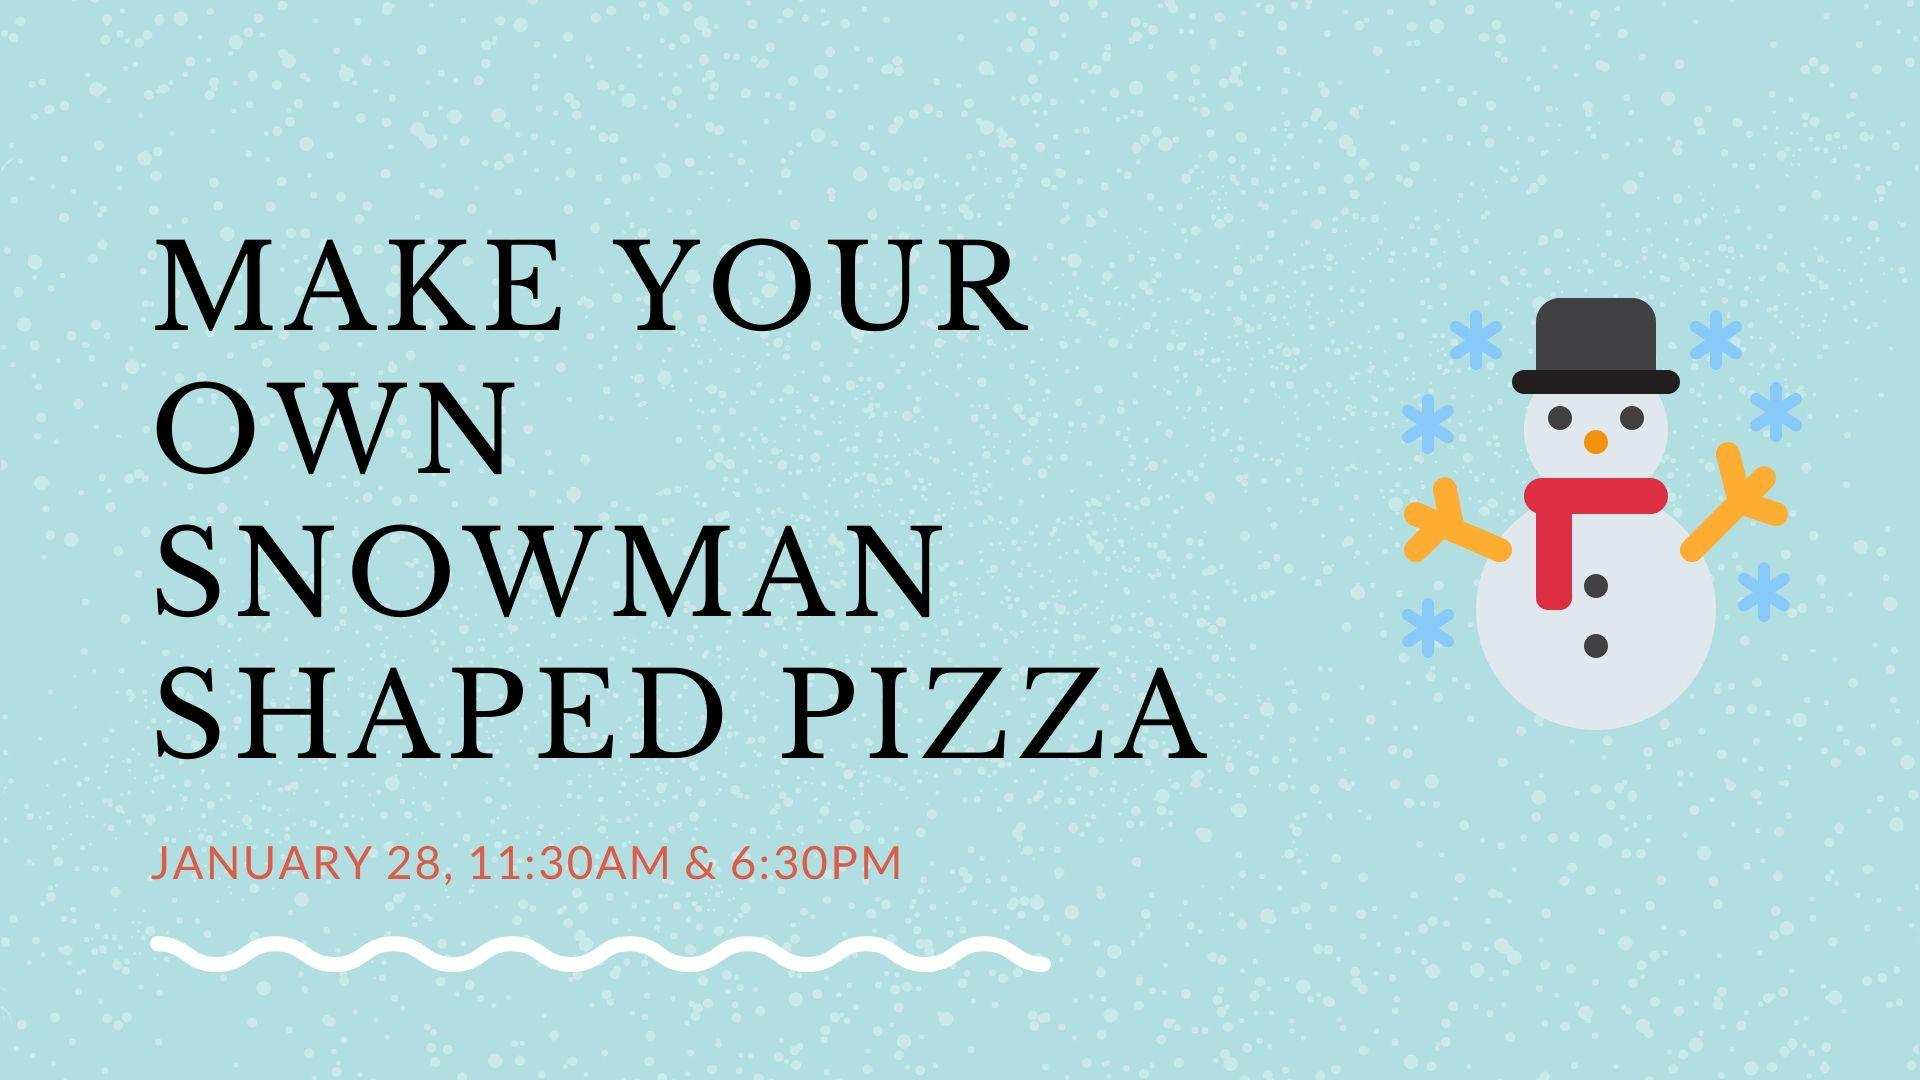 Make Your Own Snowman Shaped Pizza